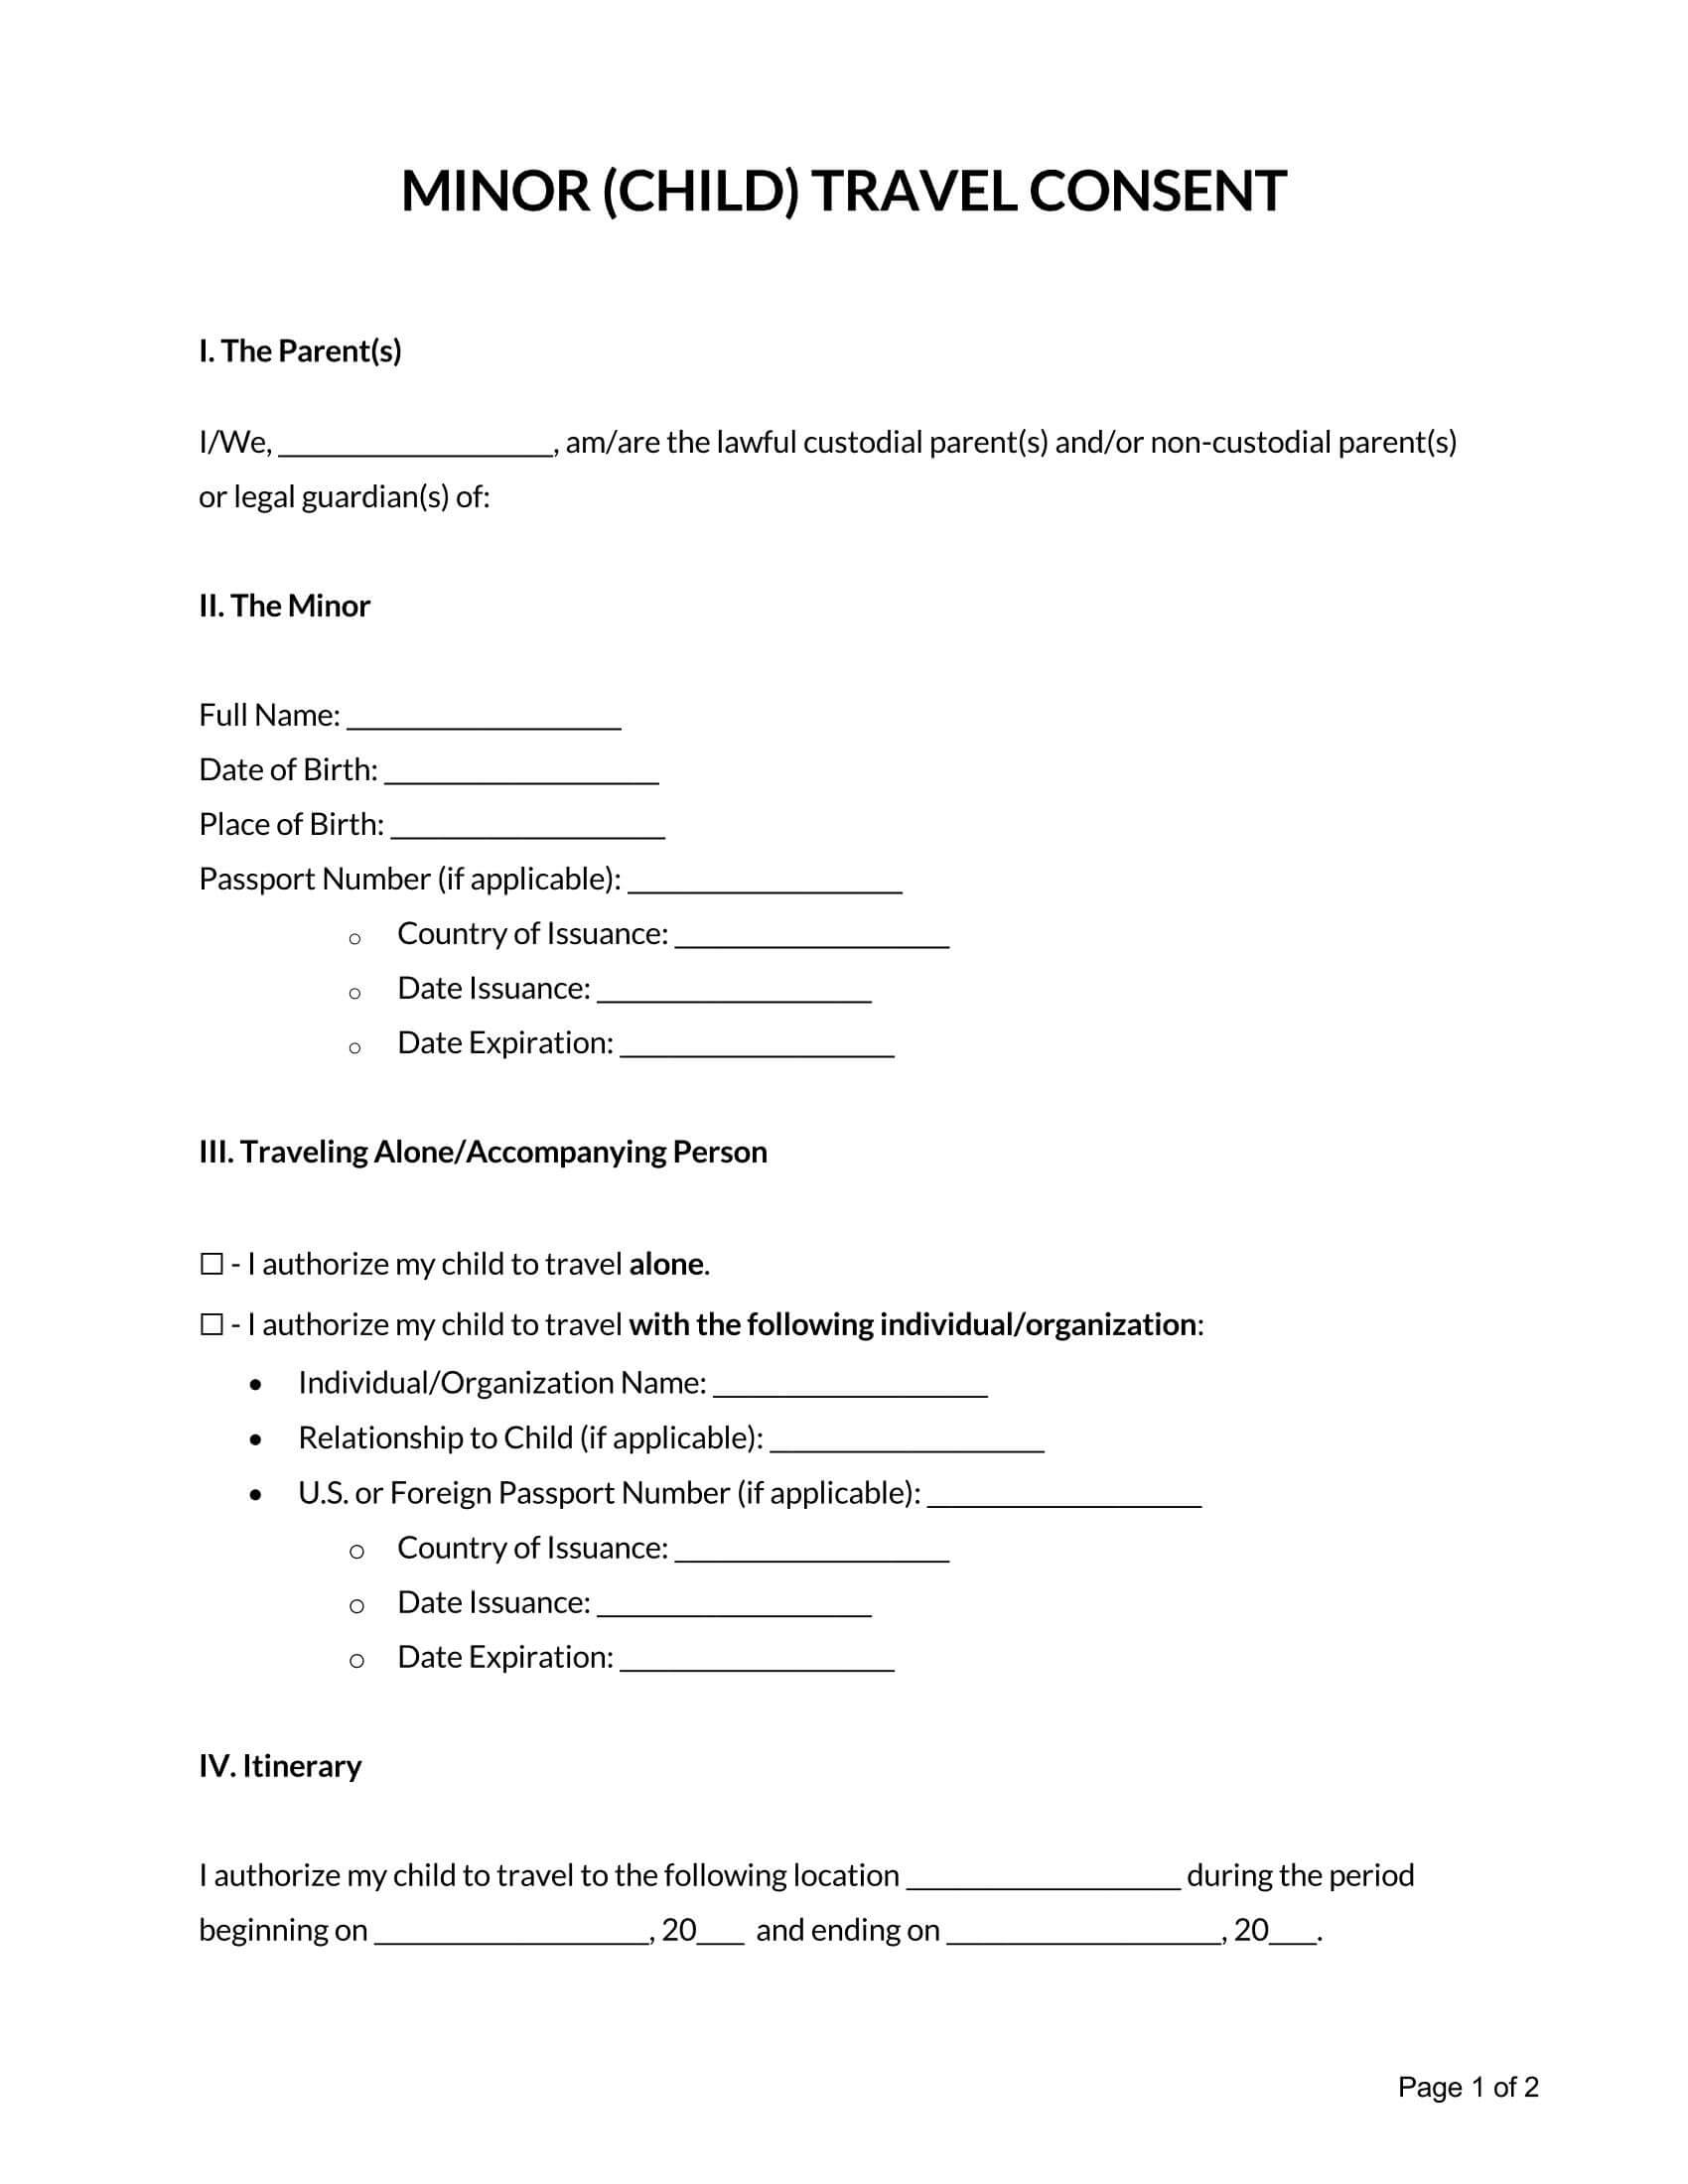 Minor Child Travel Consent Form_Page_1